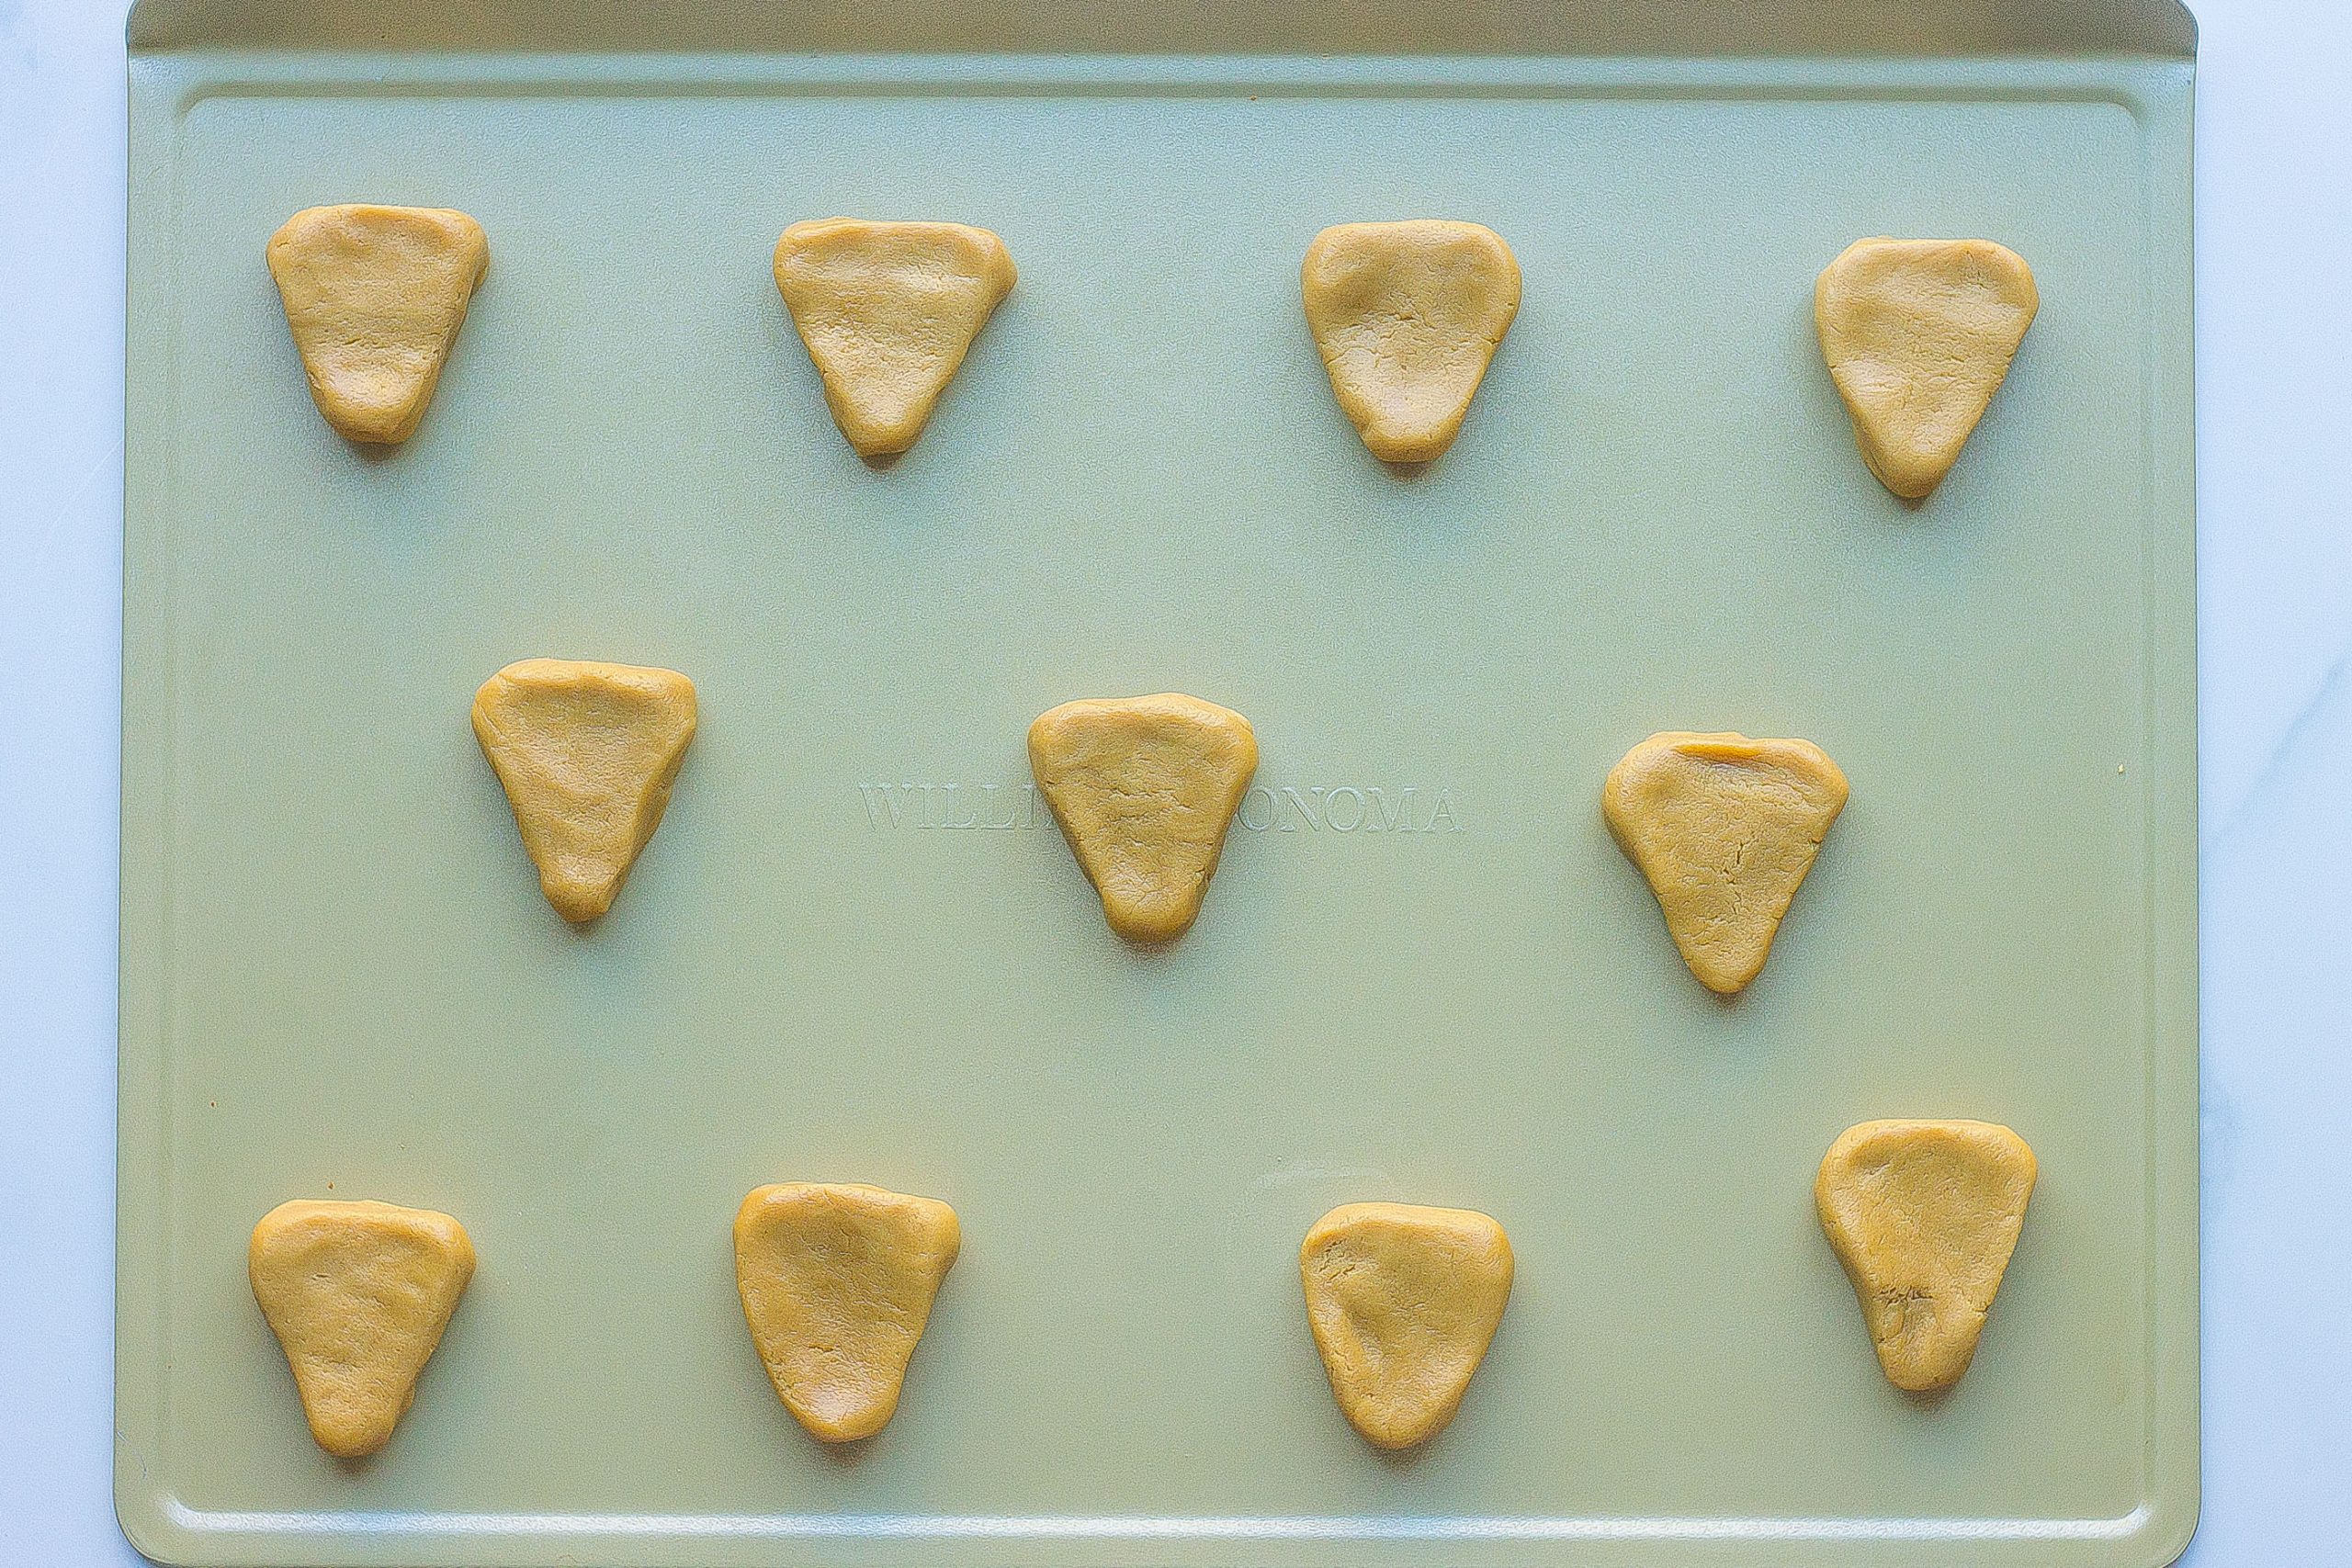 Peanut butter cookie dough shaped into triangles on cookie sheet